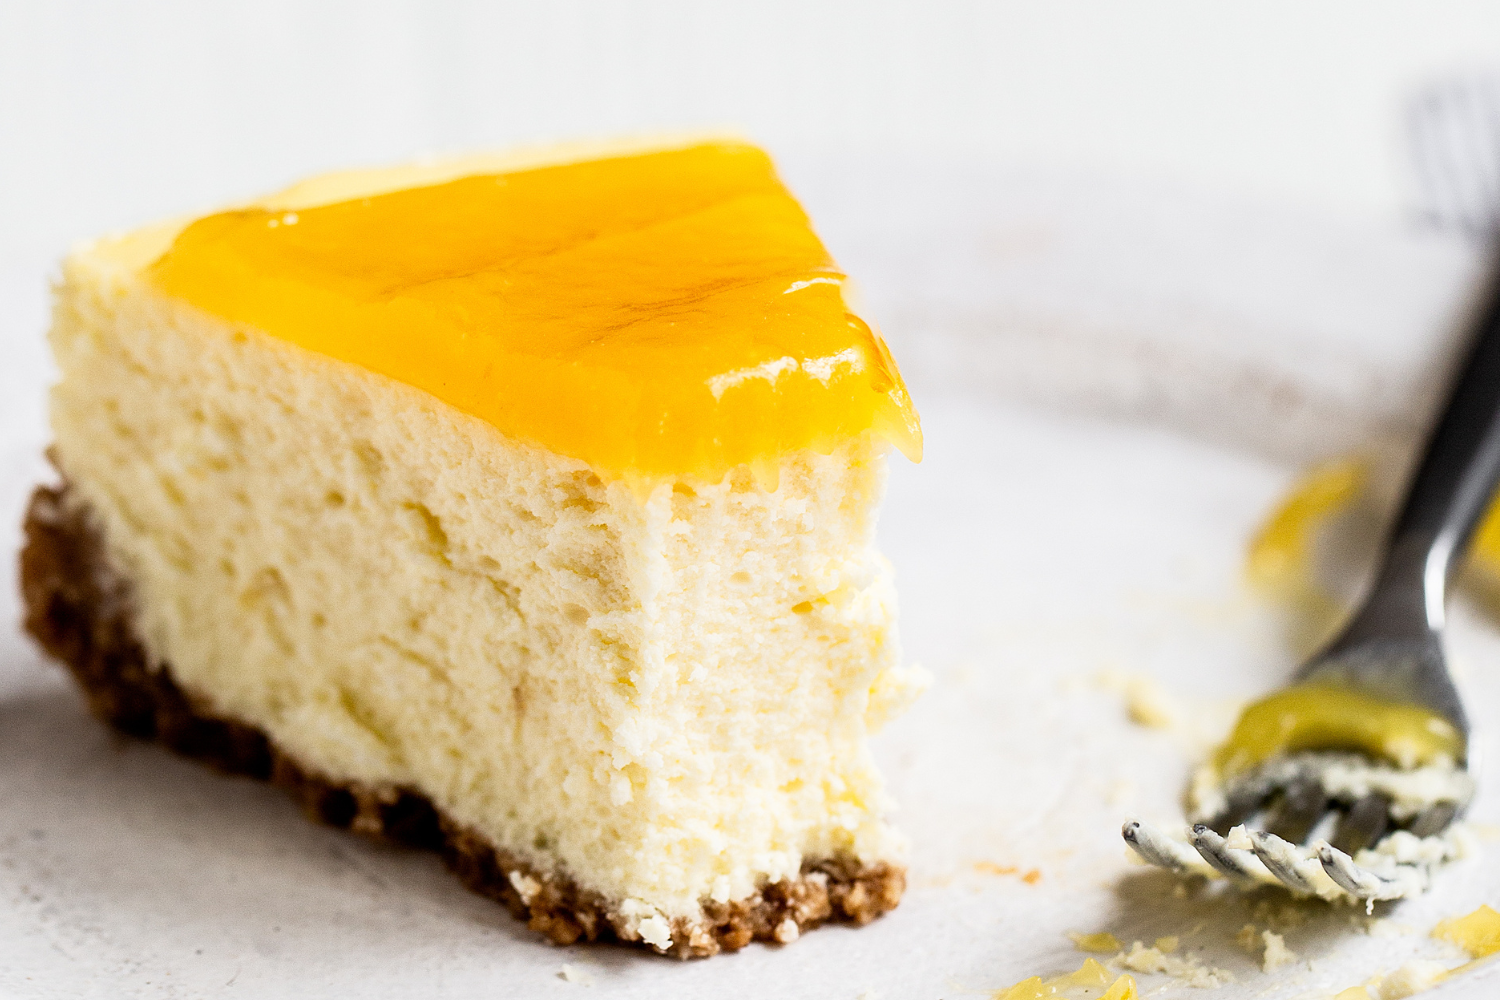 a slice of lemon cheesecake on a plate, with a fork and a bite being taken out.